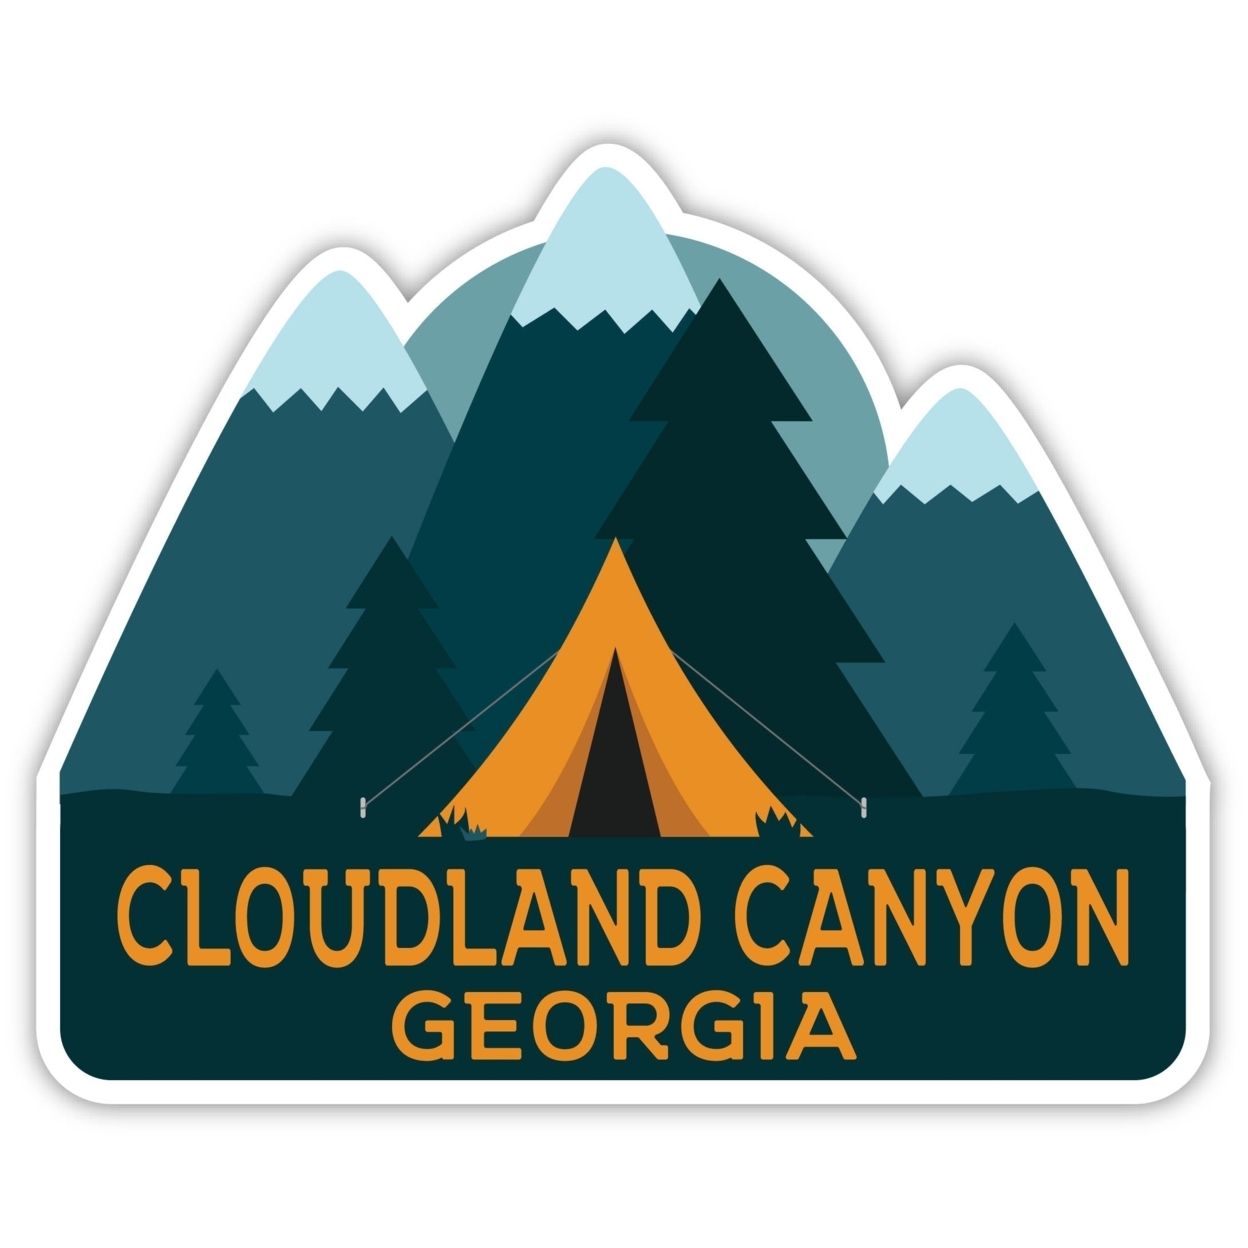 Cloudland Canyon Georgia Souvenir Decorative Stickers (Choose Theme And Size) - Single Unit, 2-Inch, Great Outdoors